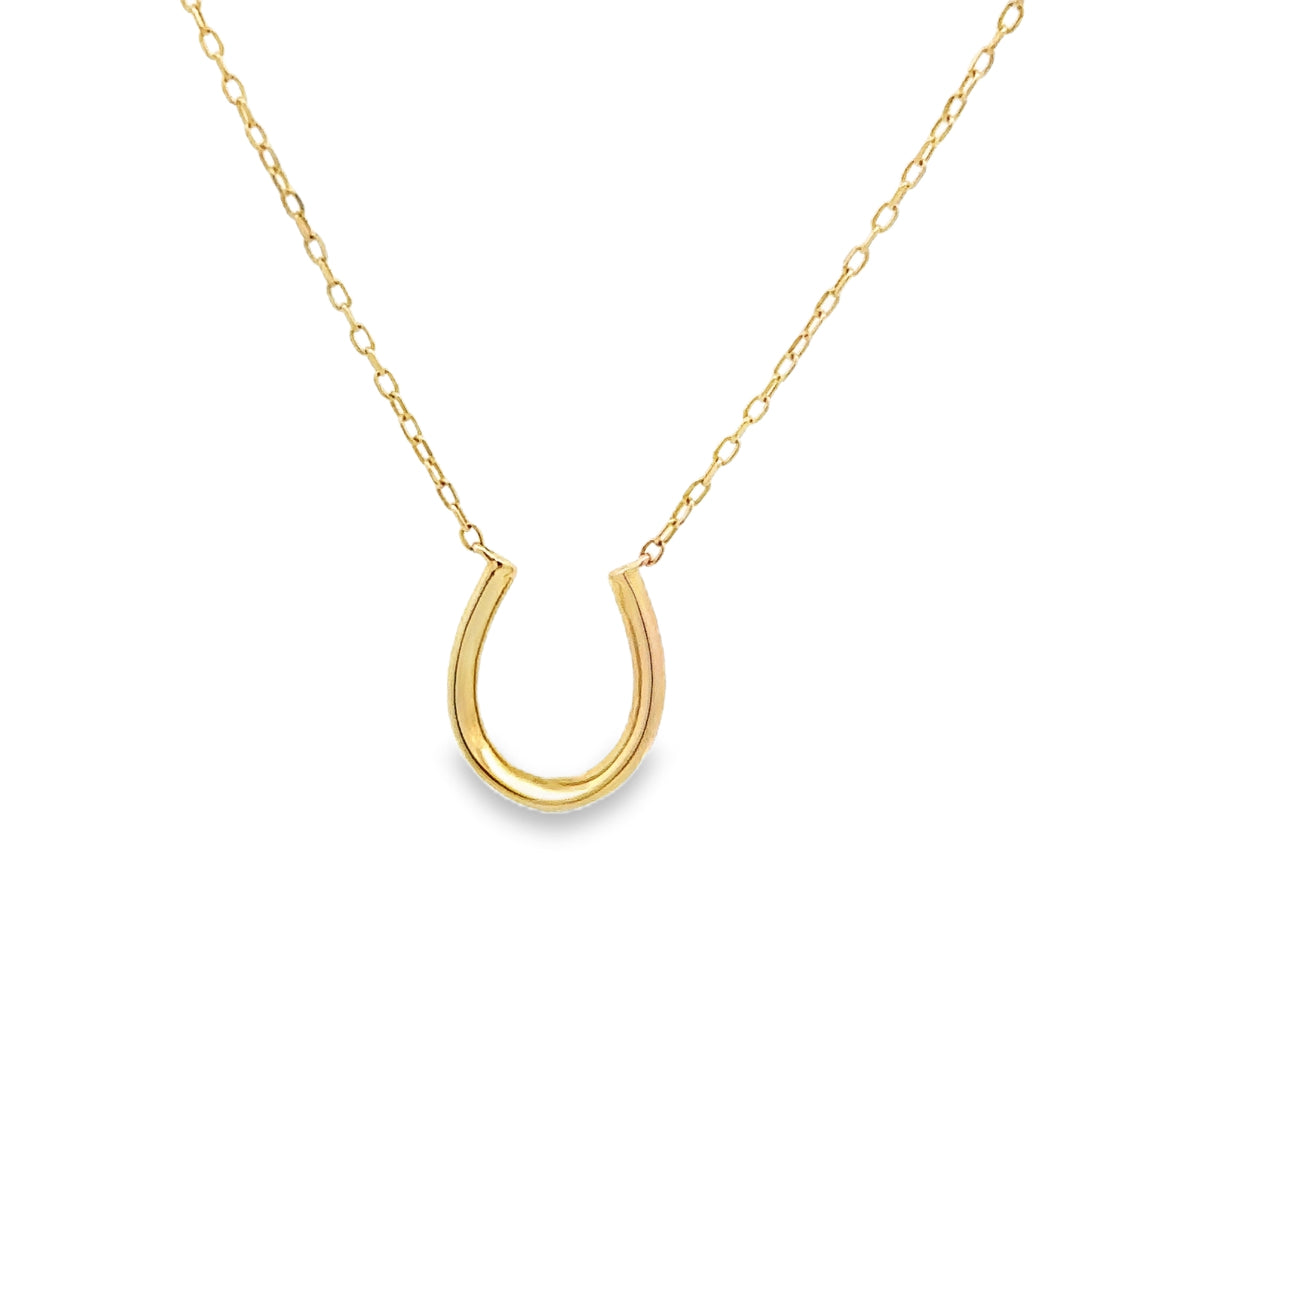 WD1637 14kt Gold Horseshoe Necklace with Pave Diamonds